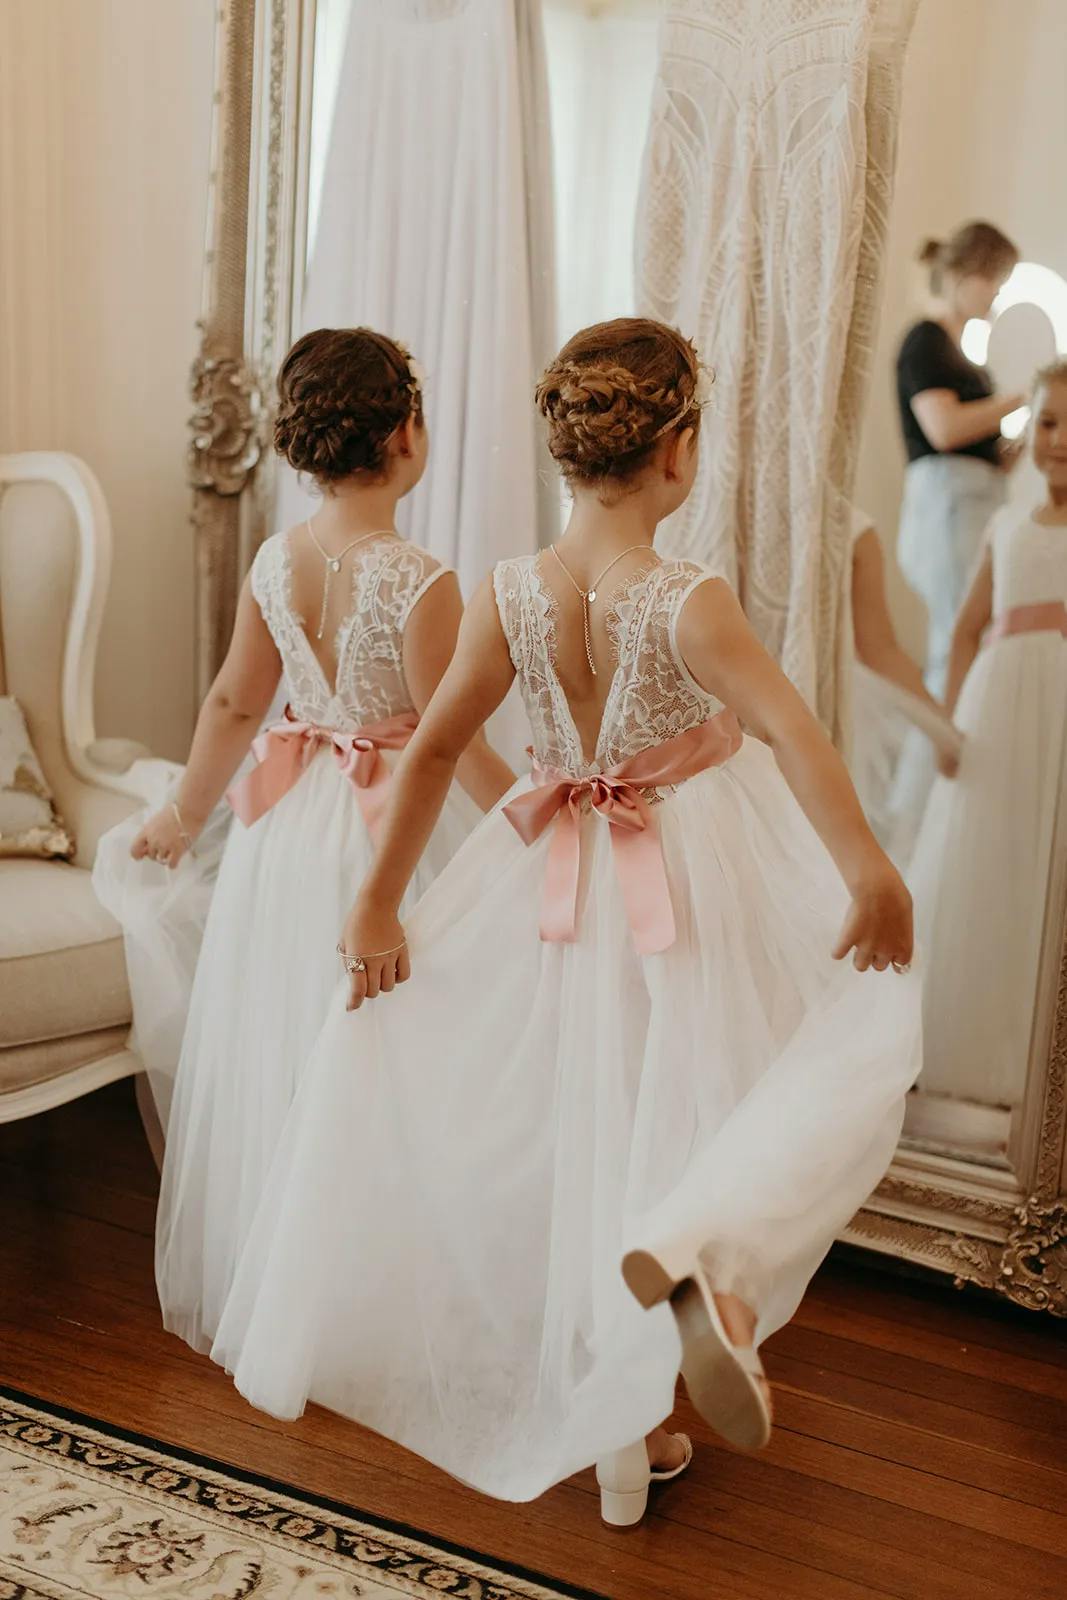 Two young girls wearing white dresses with pink bows stand in front of a large mirror. They have braided hair adorned with floral headbands and are looking at their reflections while gently holding up their dresses. A woman in the background adjusts another girl's dress.